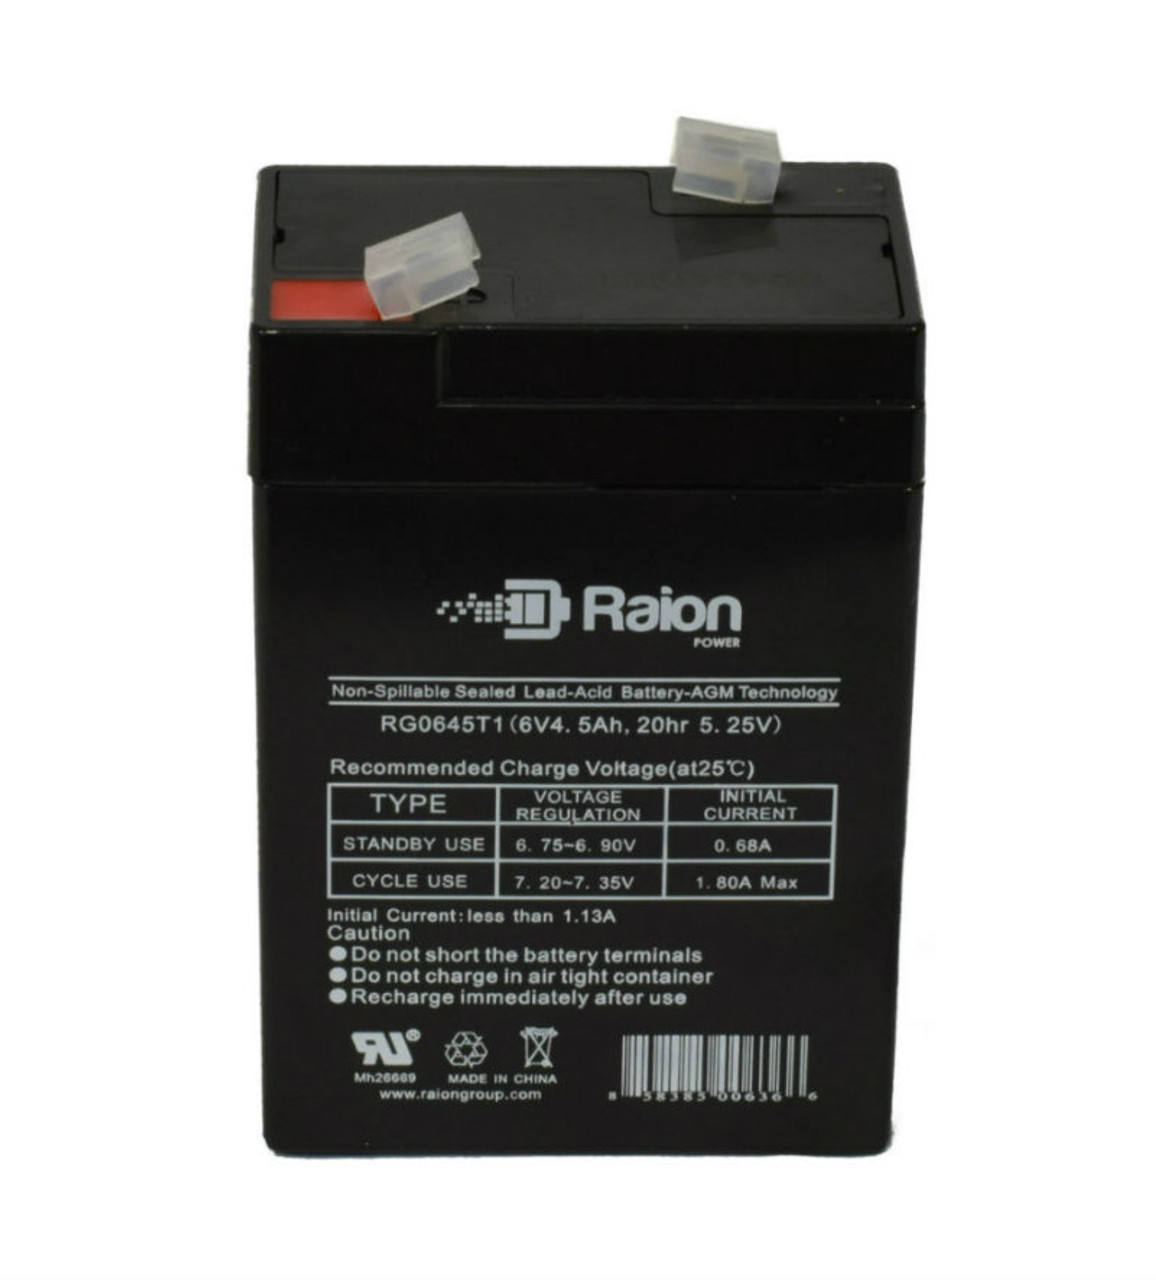 Raion Power RG0645T1 Replacement Battery Cartridge for Mcgaw 821 Intelligent Pump